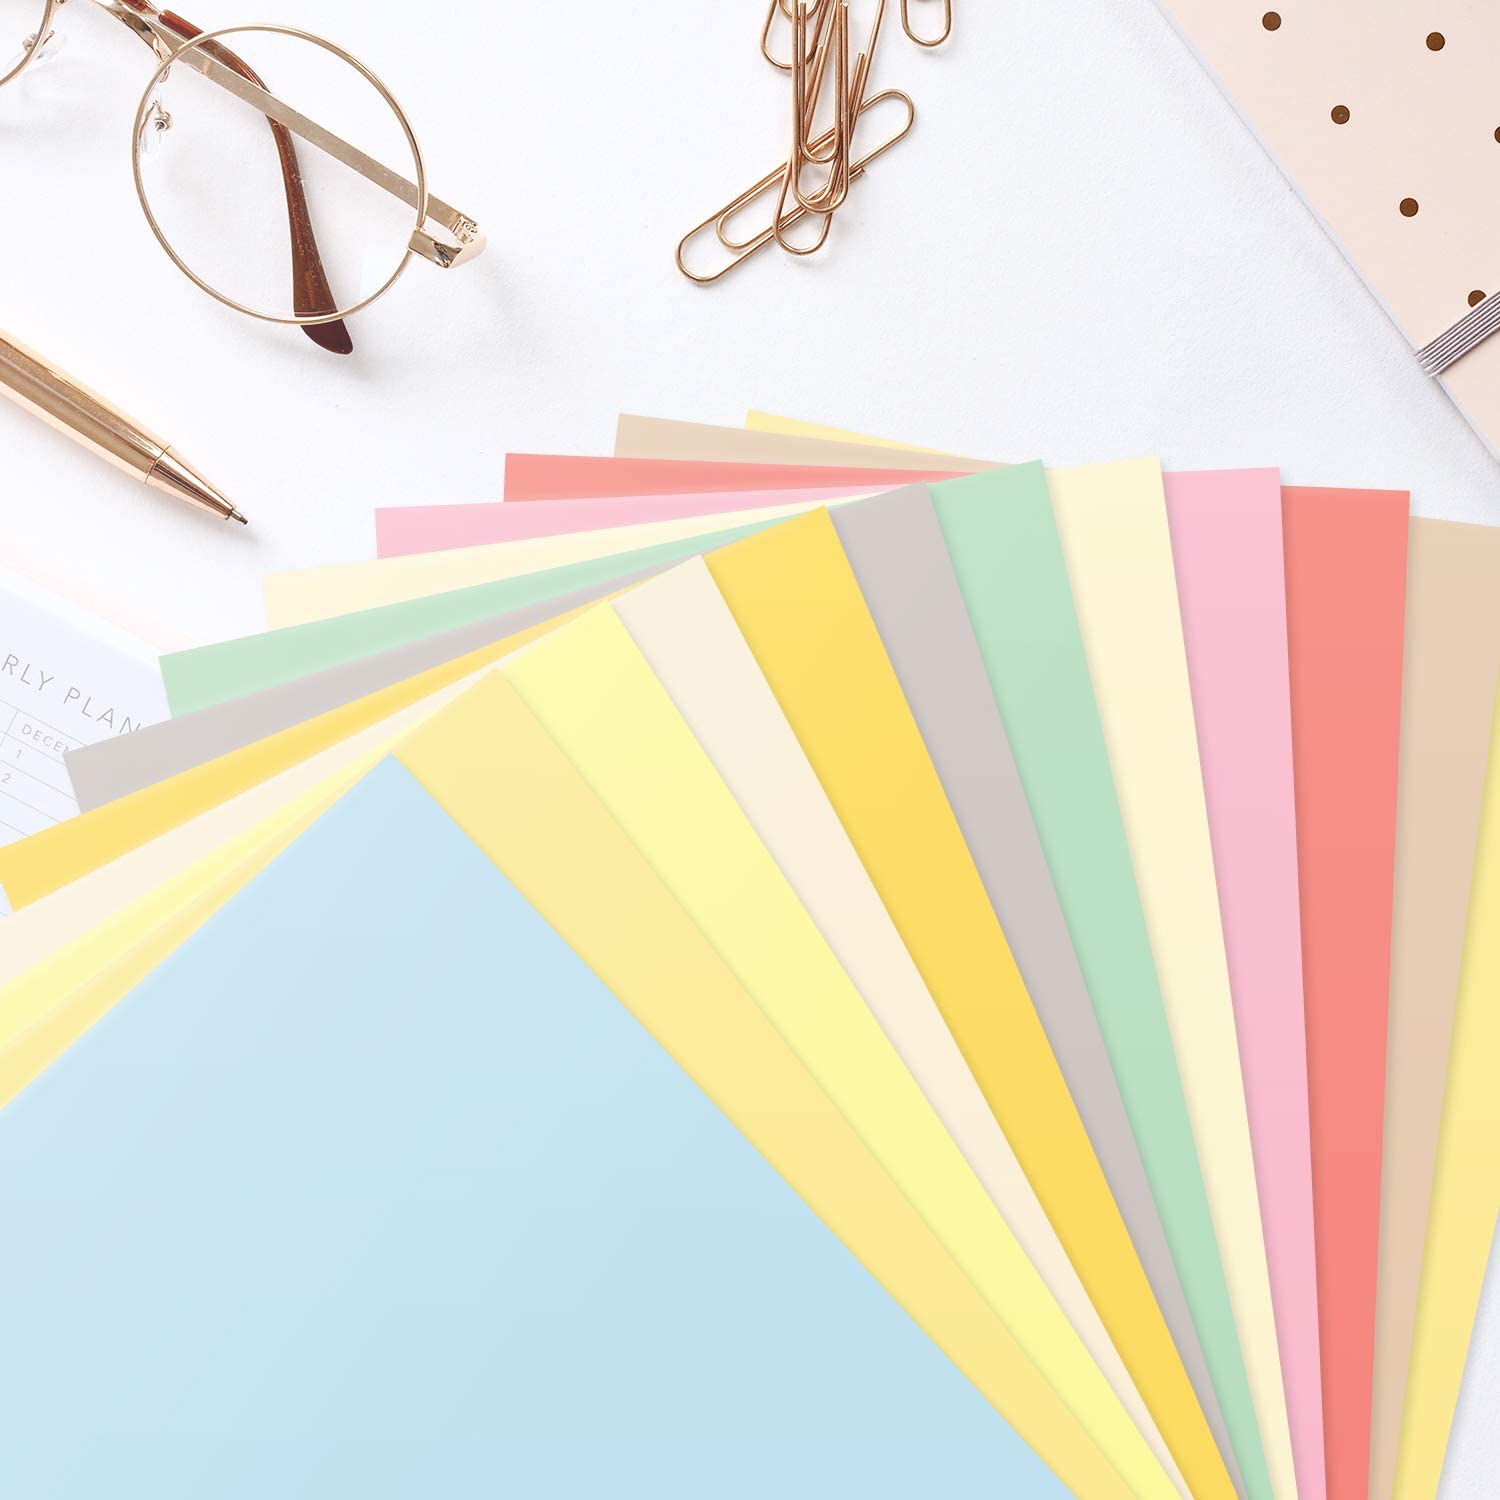 8.5 x 14” Pastel Color Paper – Great for Cards and Stationery Printing | Legal, Menu Size | Lightweight 20lb Paper | 100 Sheets | Buff - image 2 of 6